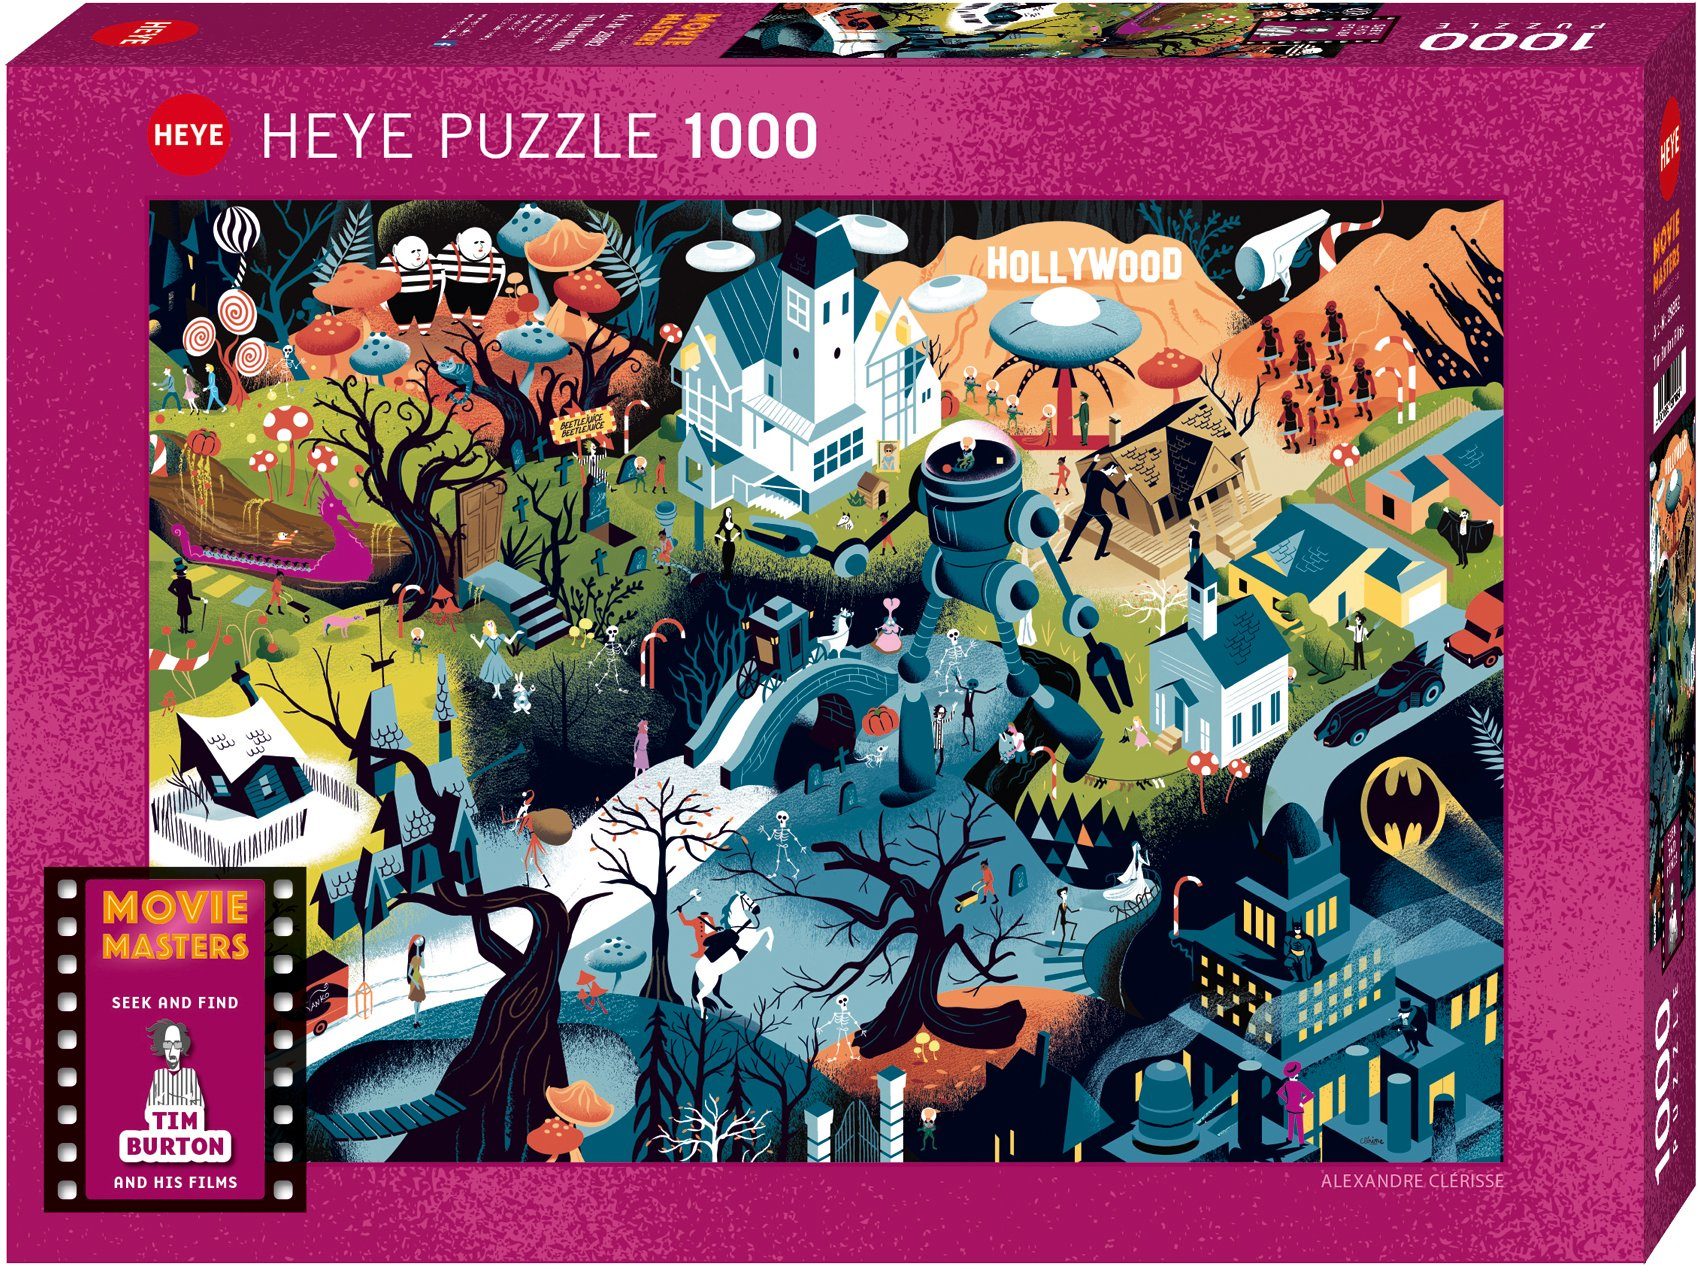 Germany Films, Puzzle Made HEYE 1000 in Burton Tim Puzzleteile,